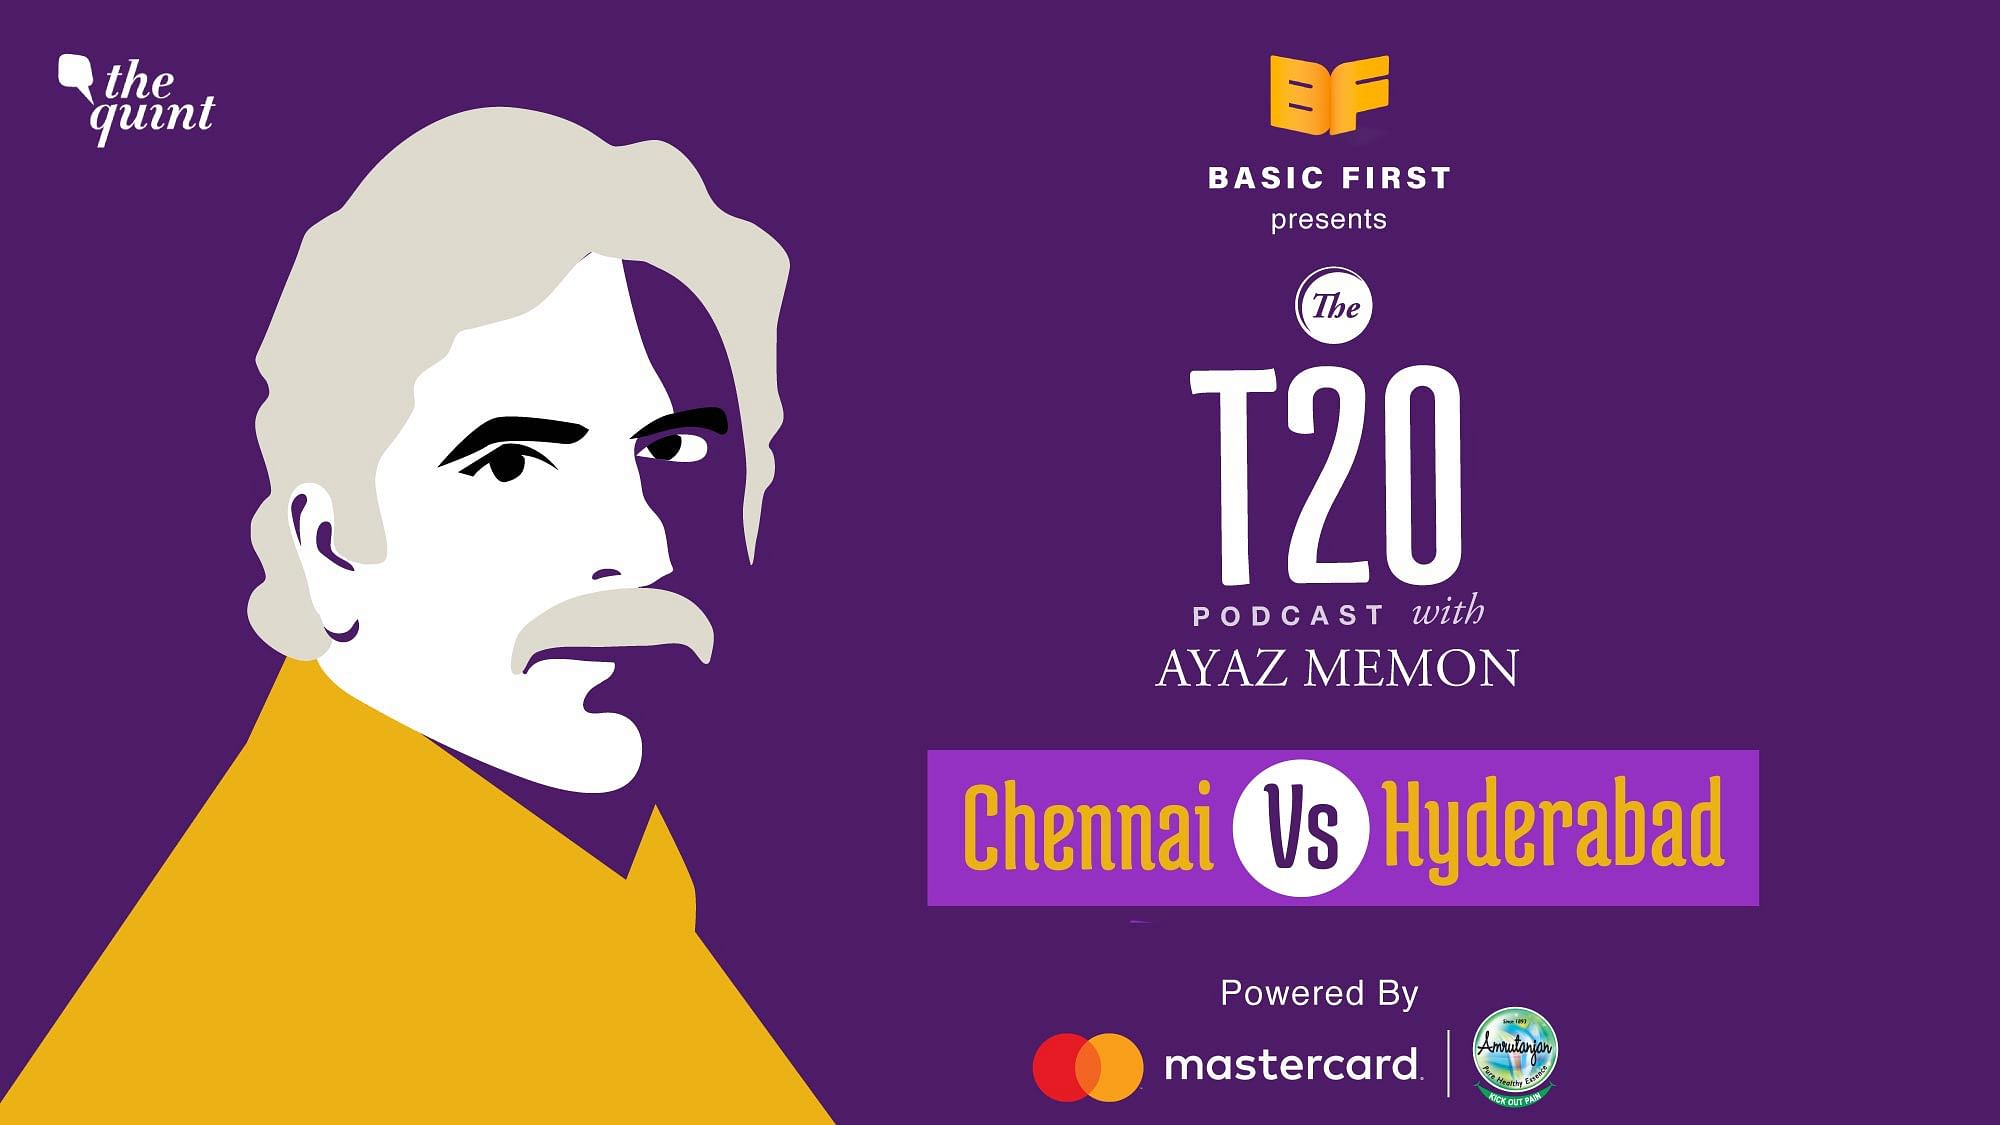 On episode 14 of The T20 Podcast, Ayaz Memon and I talk about Chennai’s 7 run loss to Hyderabad on Friday night.